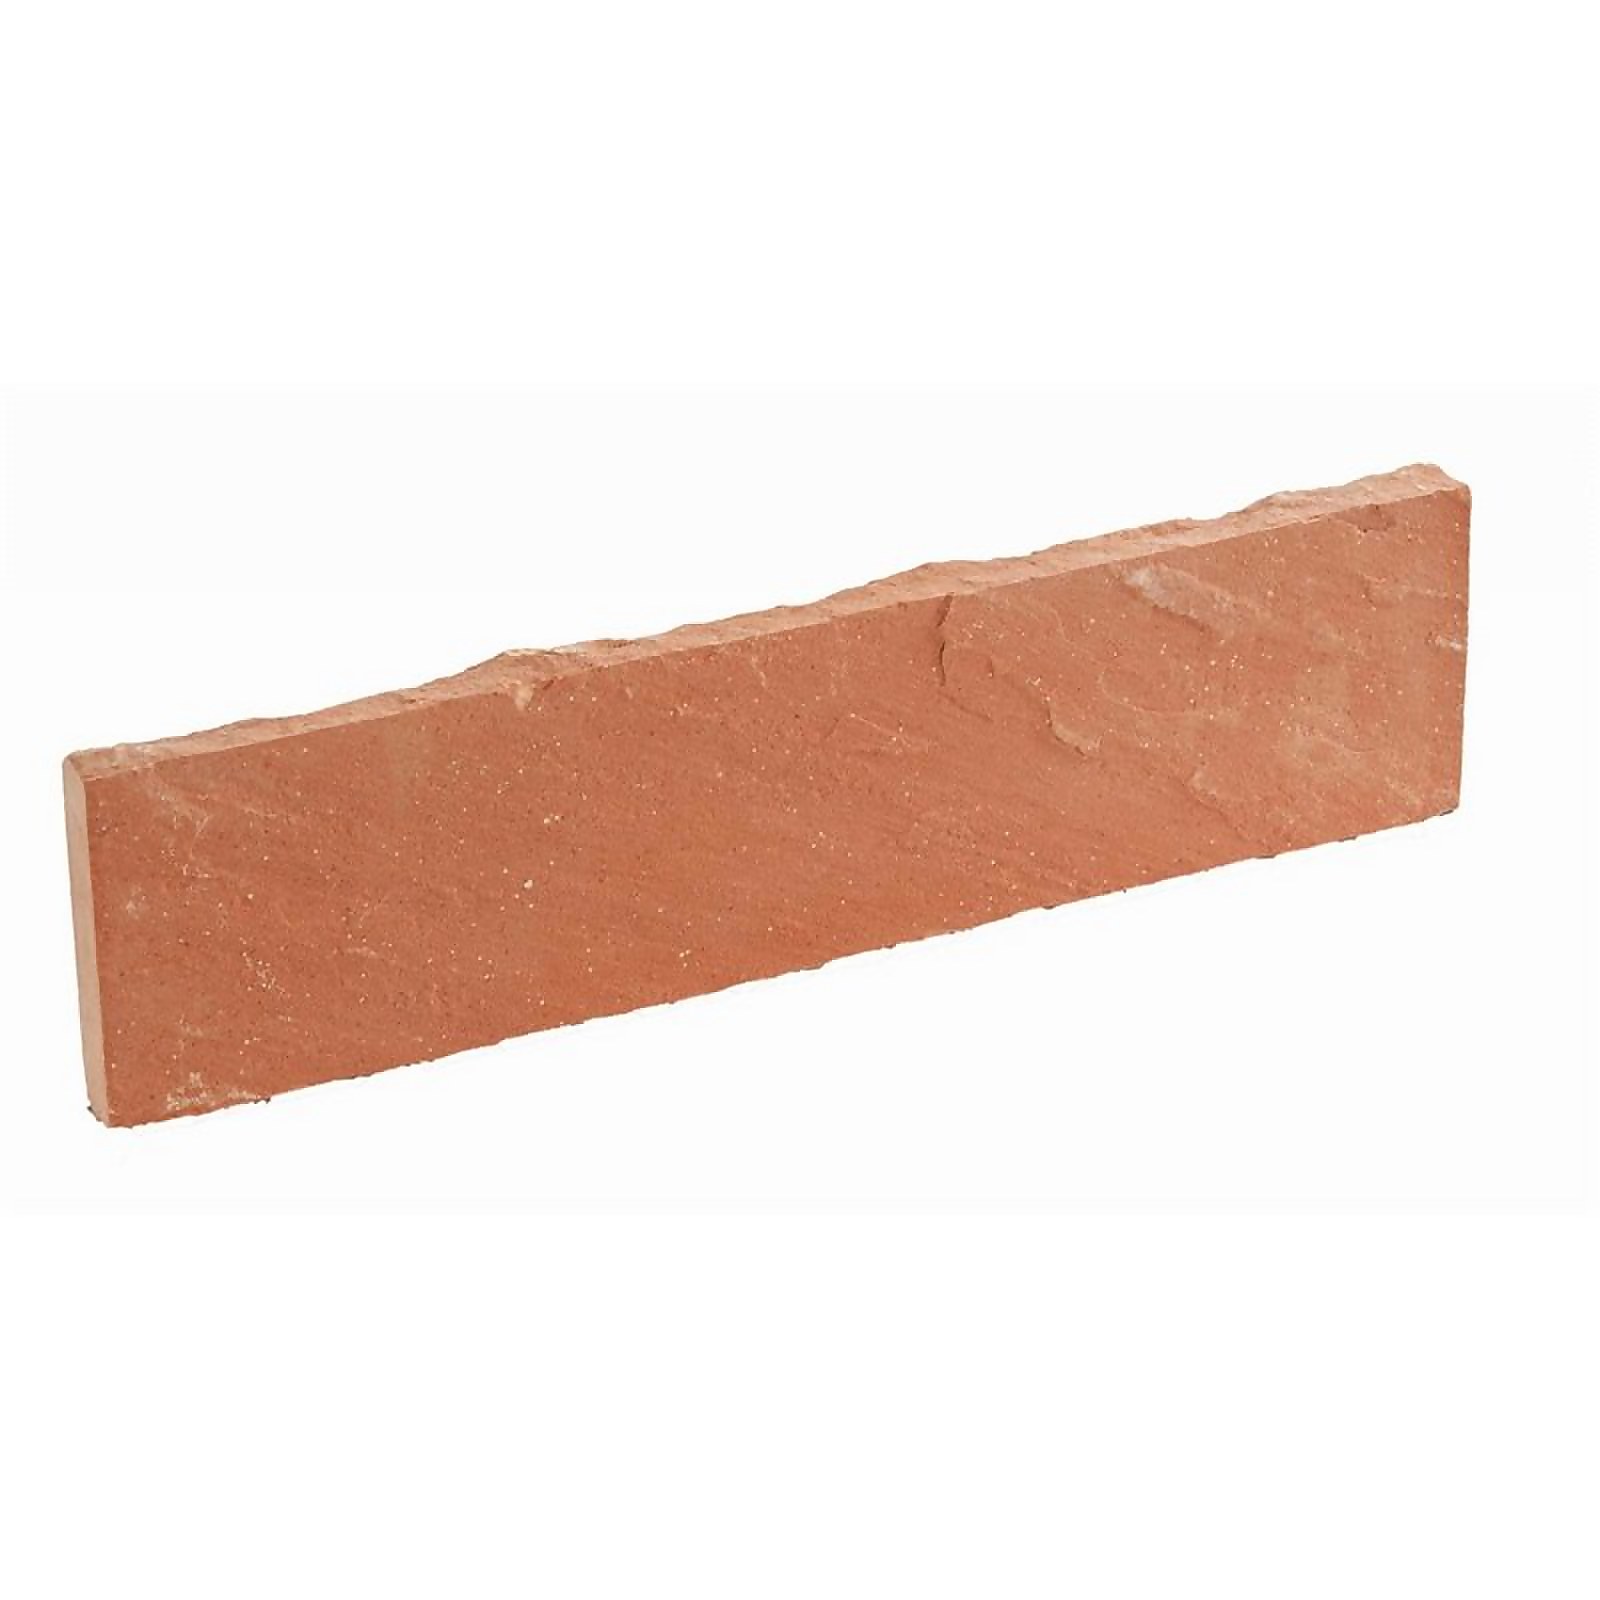 Photo of Stylish Stone Natural Stone Coping/edging - Sunset Red -full Pack-